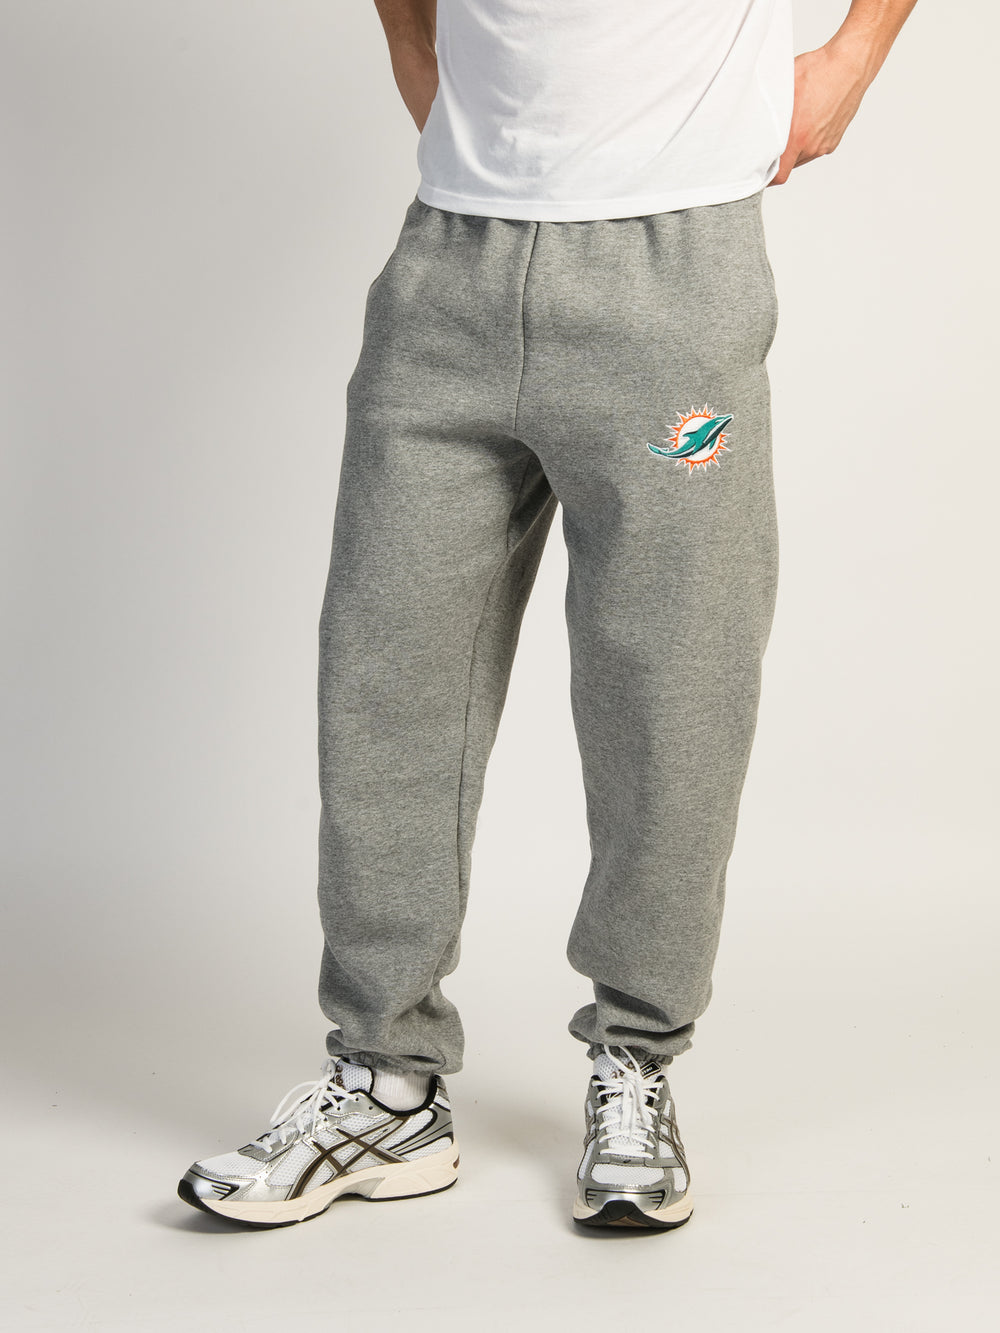 Gray Embroidered Sweatpants by Nike on Sale